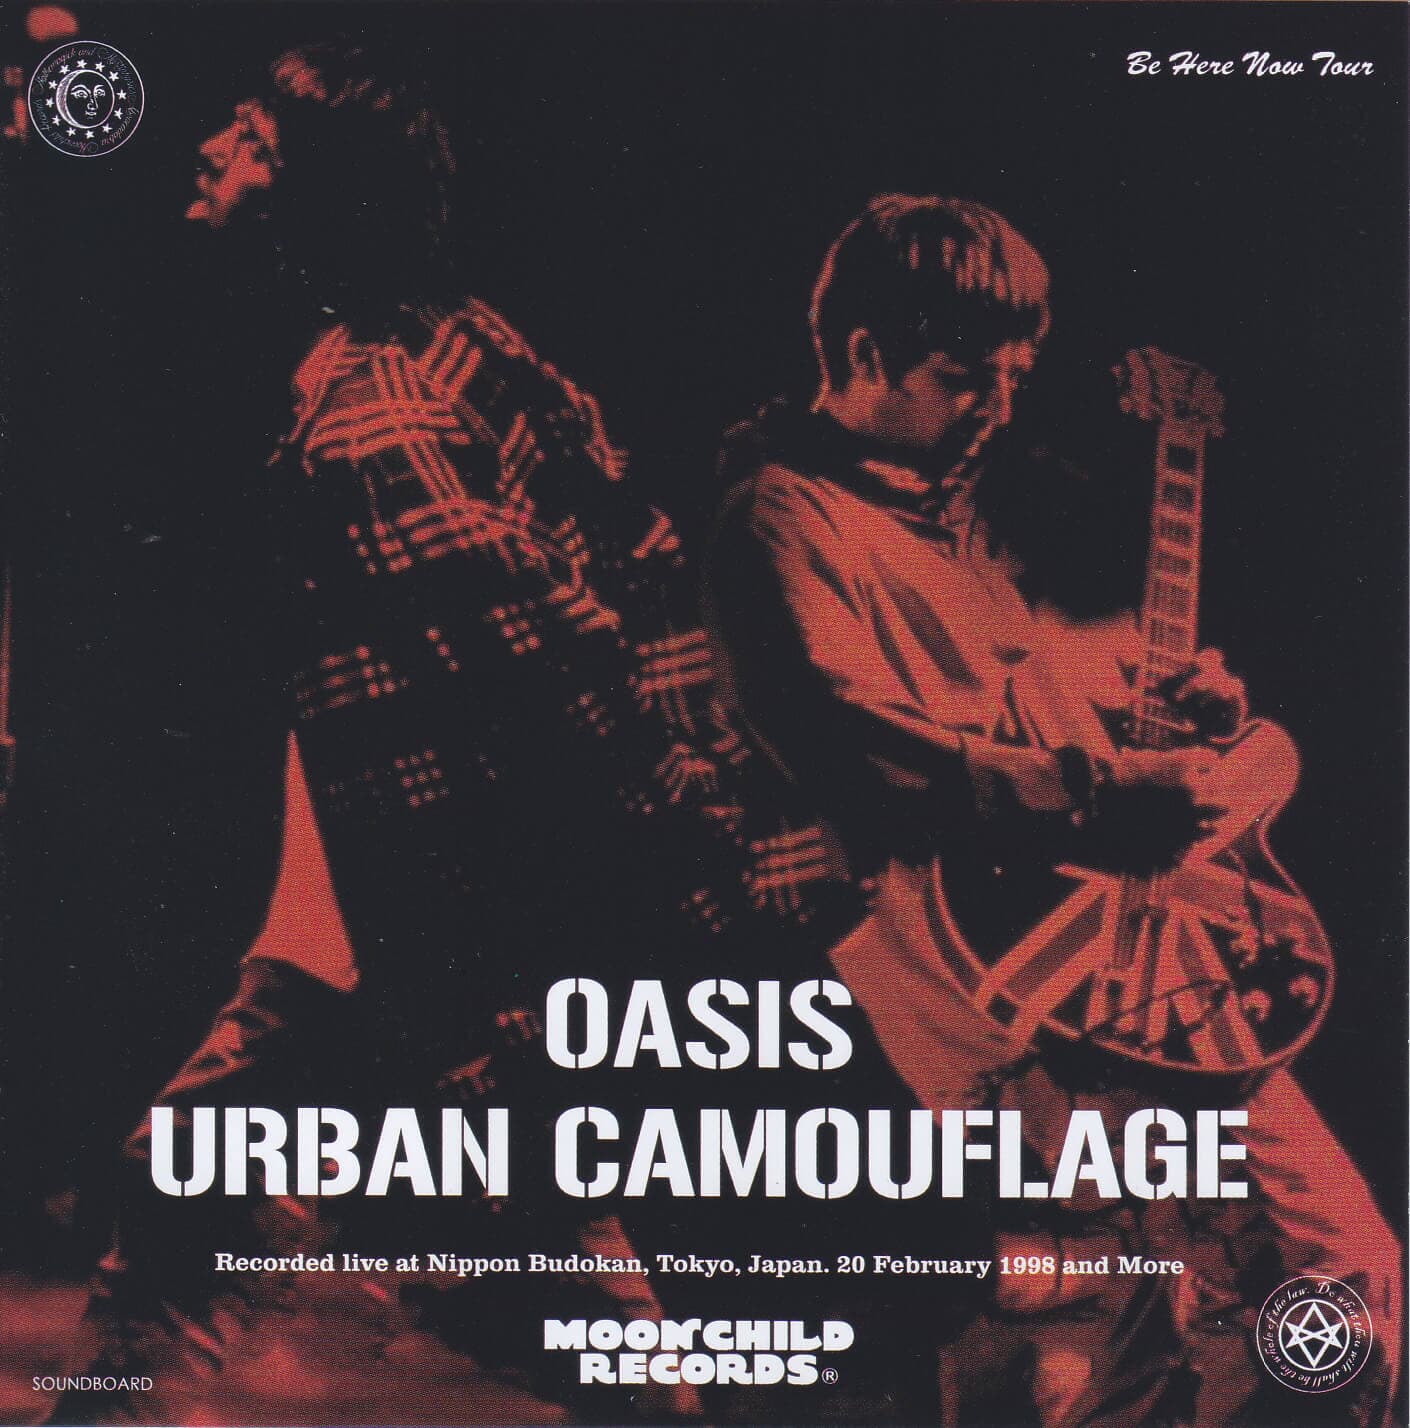 Oasis - Urban Camouflage be Here Now Tour (3CD)